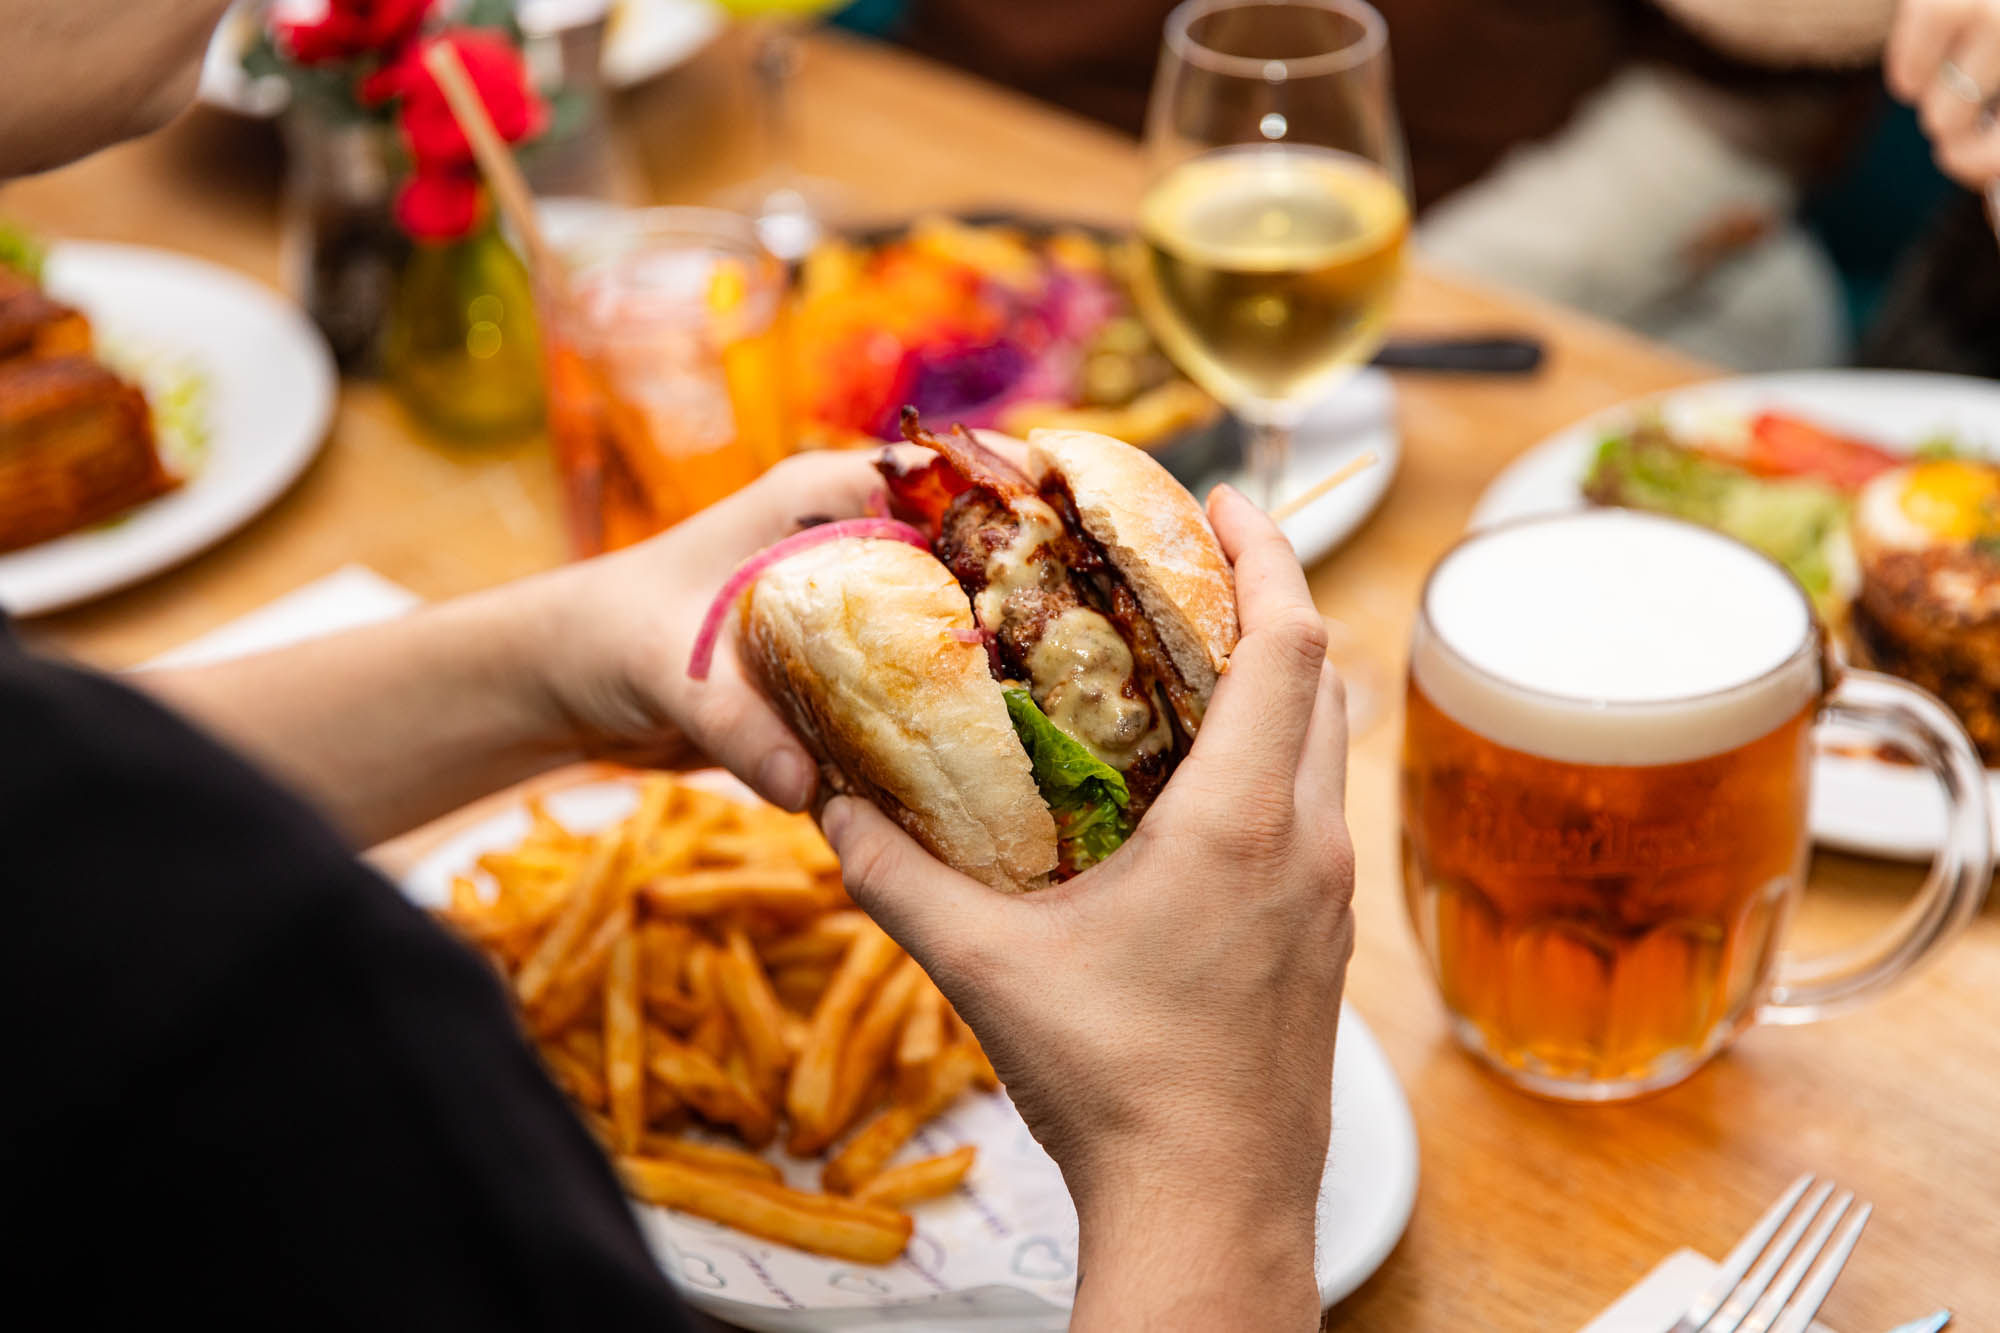 A person eating a burger with fries and a glass of beer at Arcobaleno in Brighton.